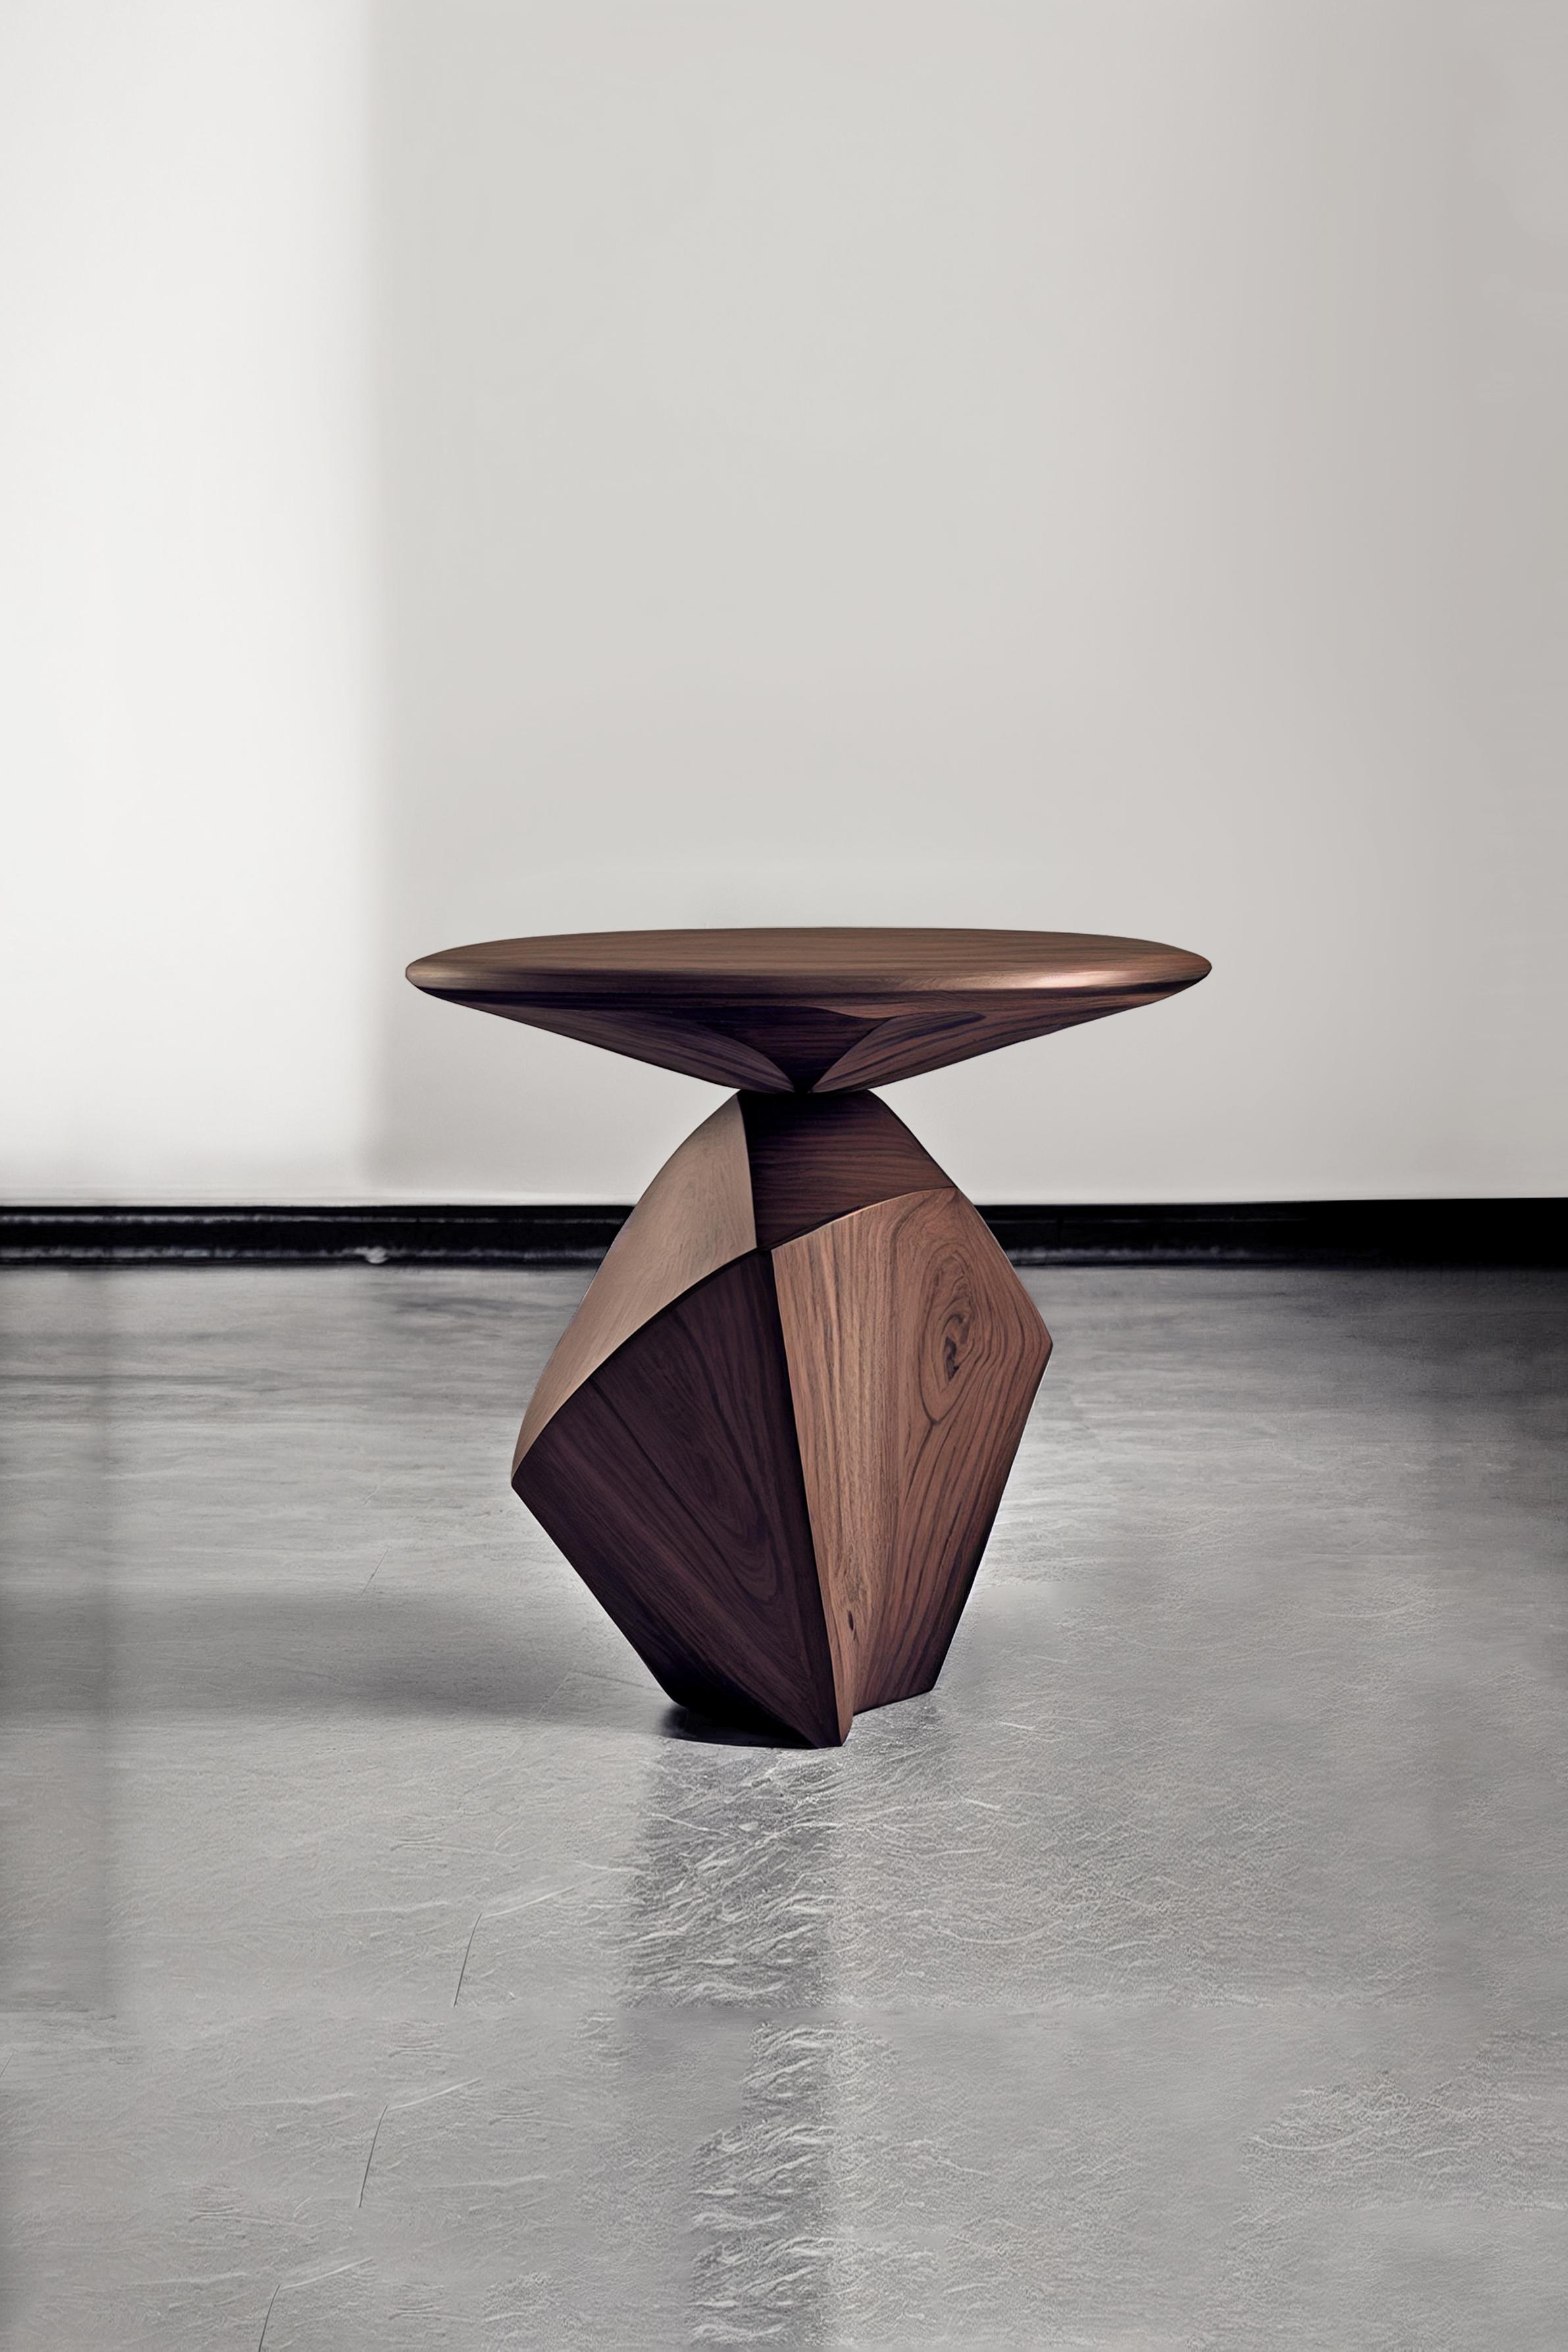 Sculptural side table made of solid walnut wood, nightstand, auxiliary table Solace S5 by Joel Escalona

The Solace side table series, designed by Joel Escalona, is a furniture collection that exudes balance and presence, thanks to its sensuous,